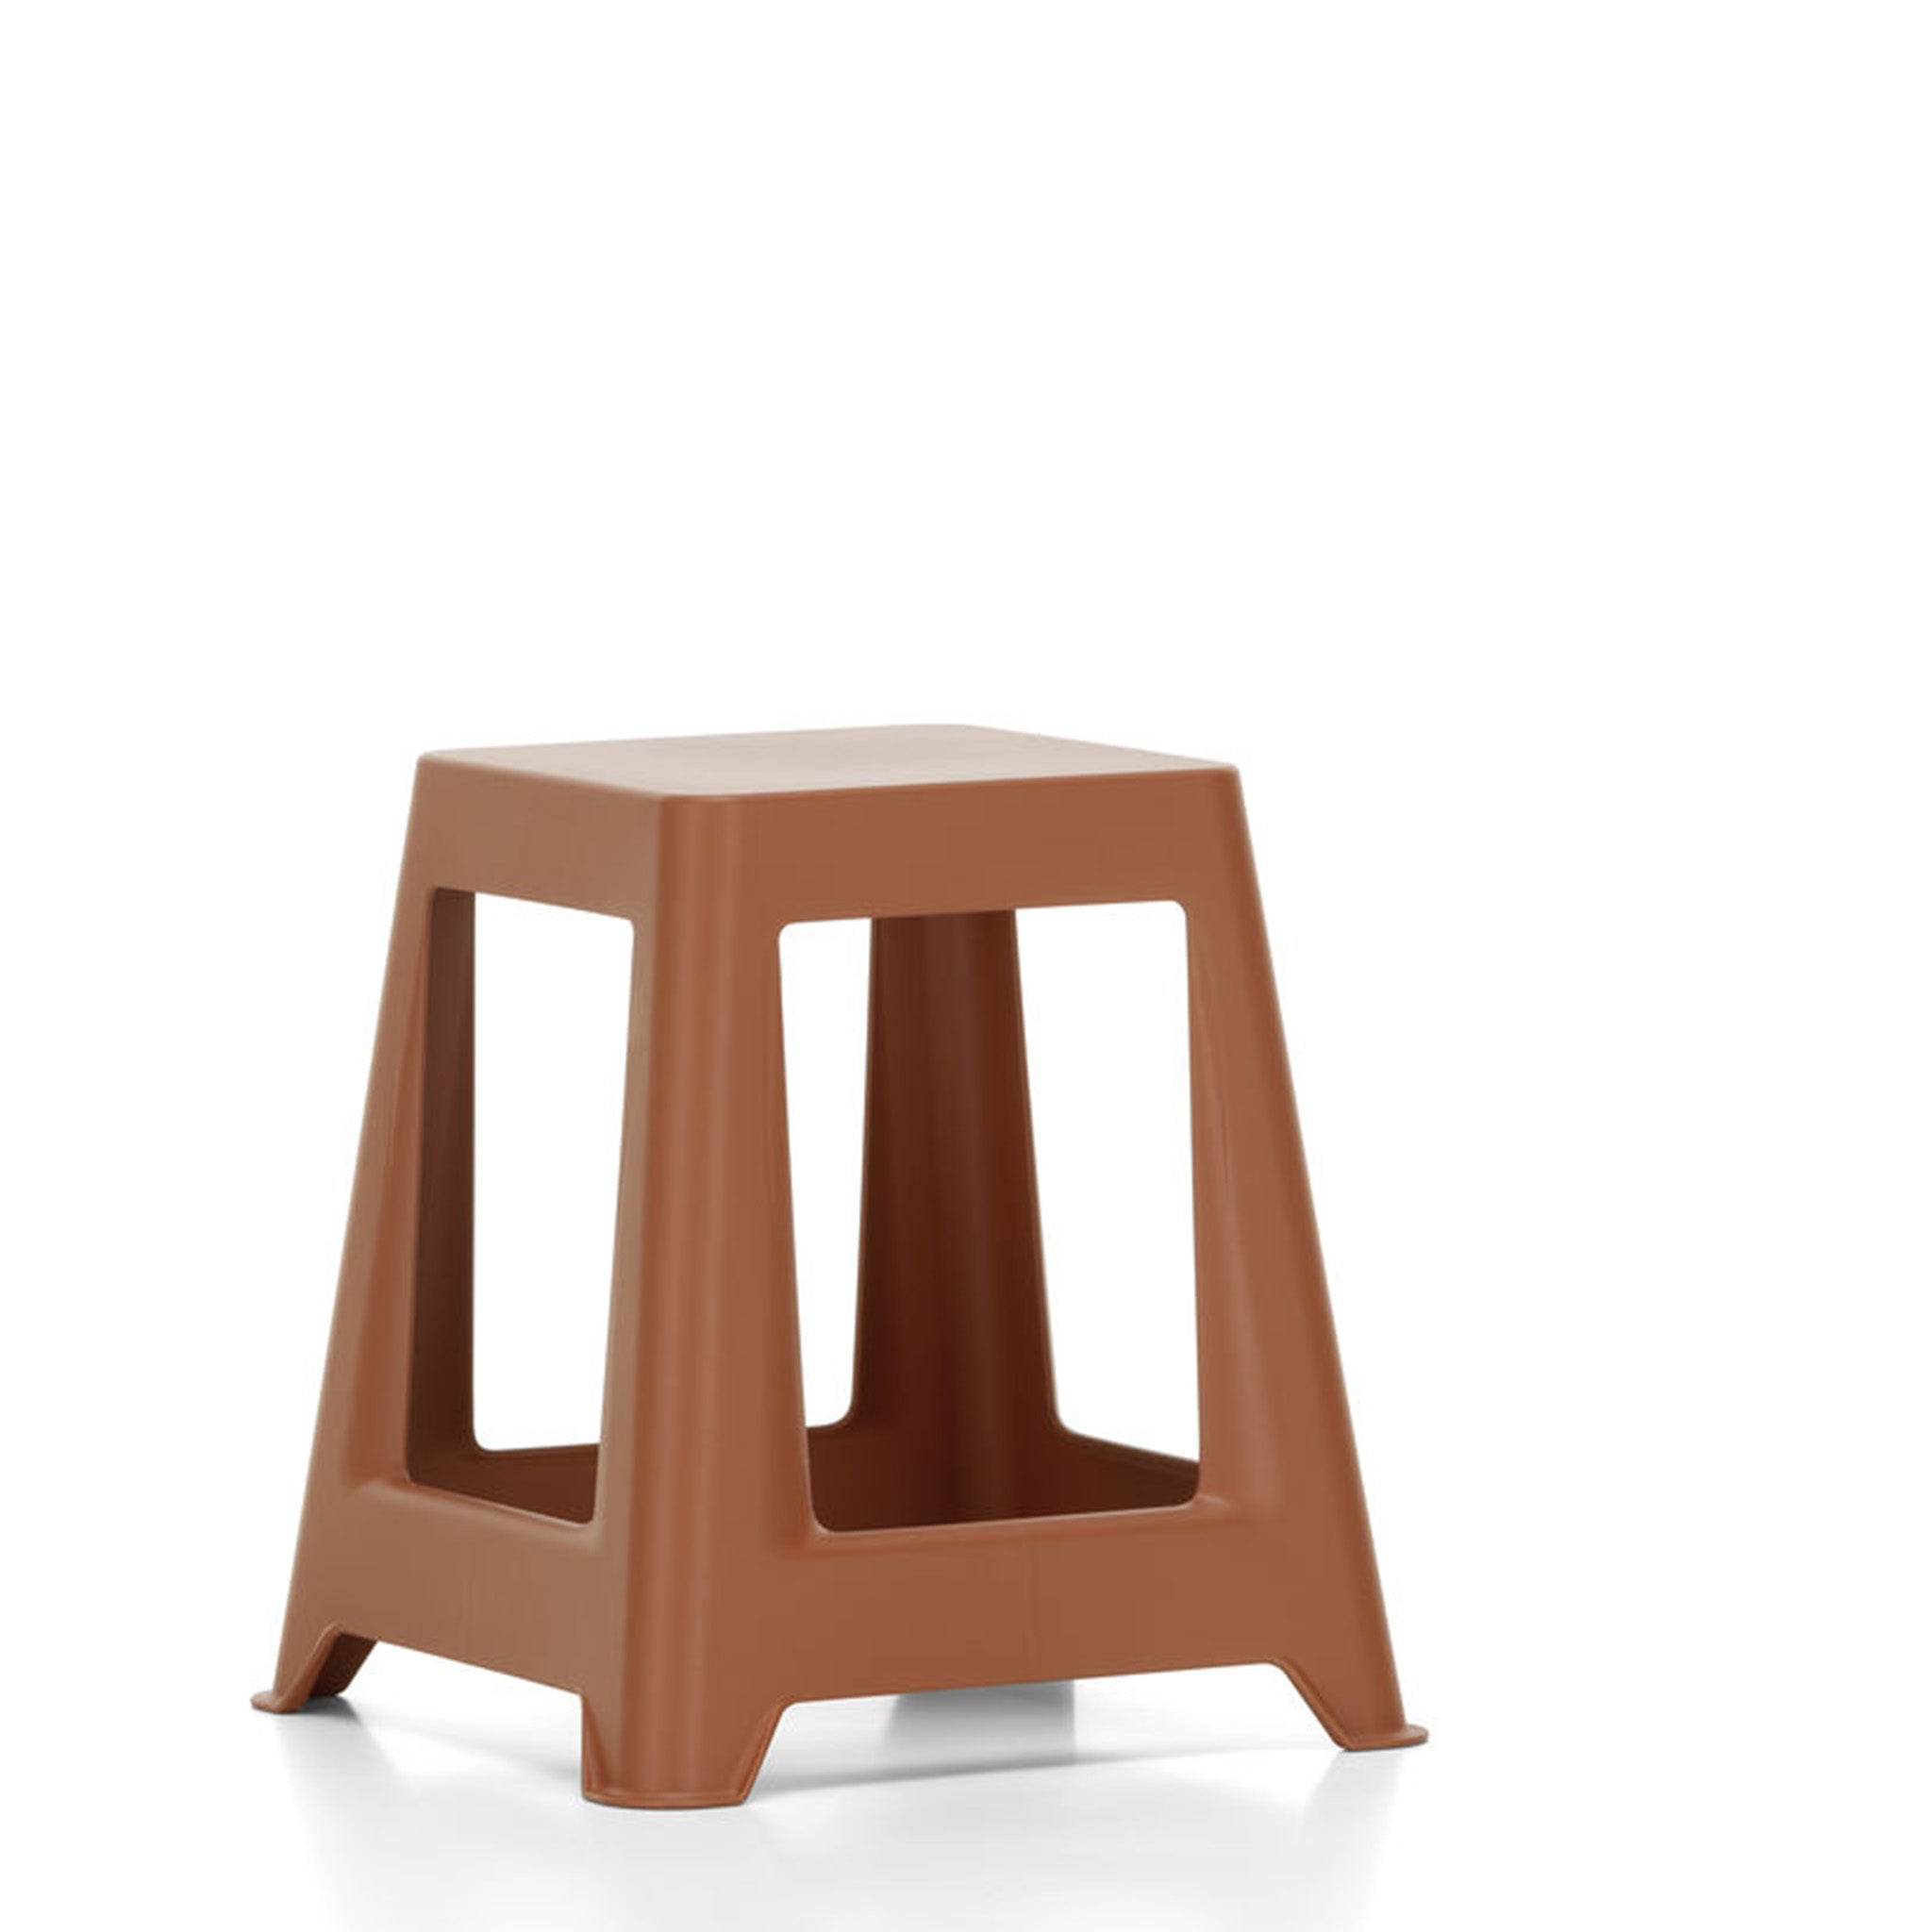 Chap by Konstantin Grcic for Vitra